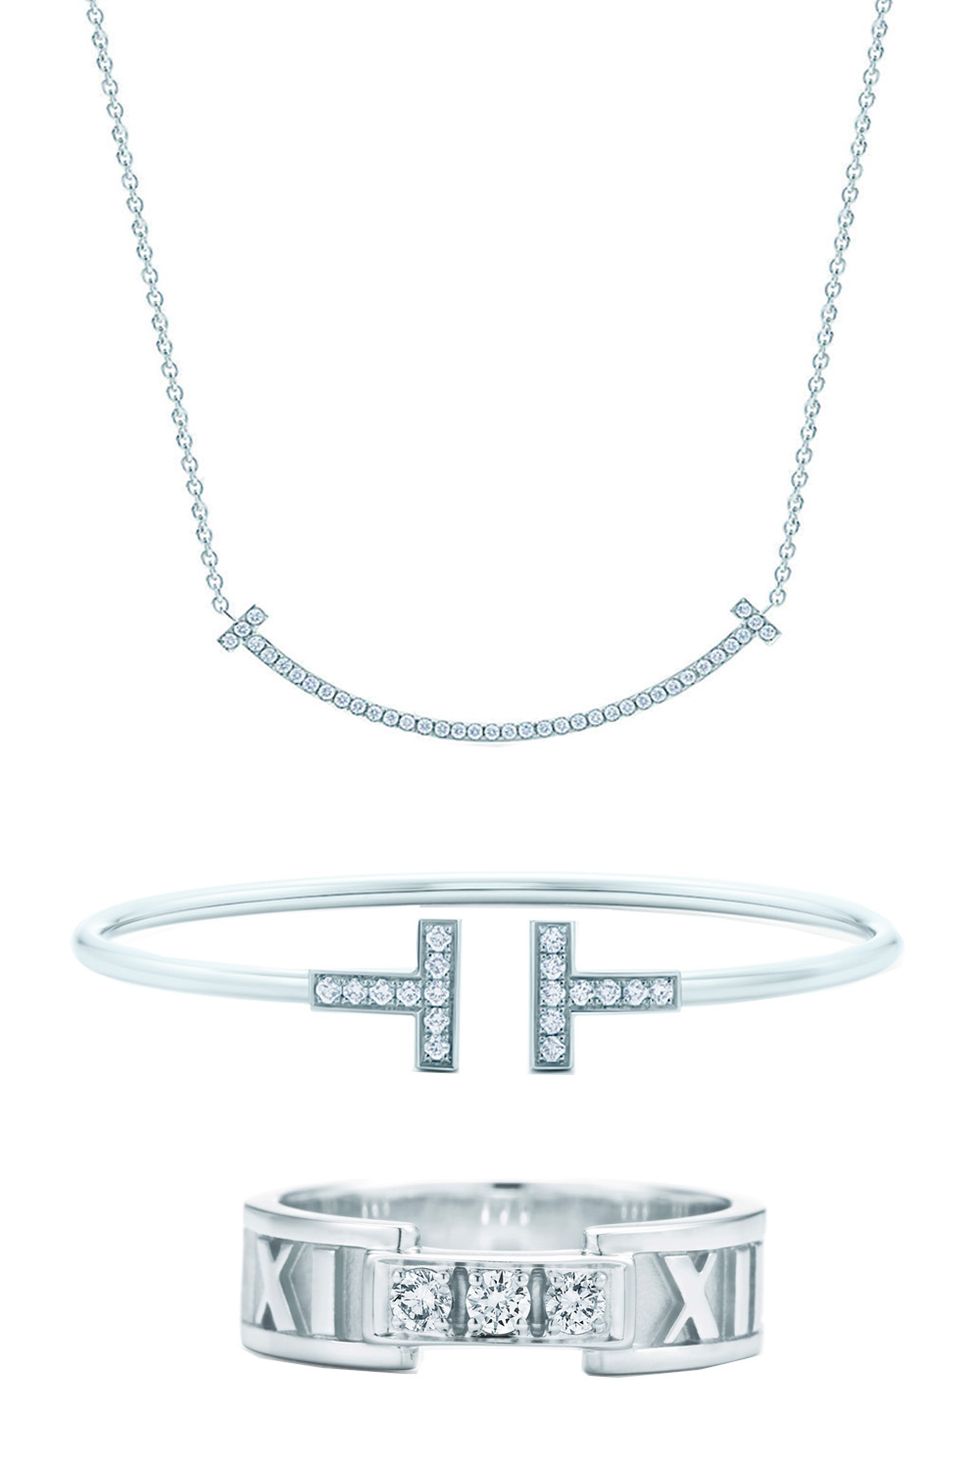 <p>Tiffany & Co. Smile Pendant Necklace, $1,900; <a href="http://www.tiffany.com/jewelry/necklaces-pendants/tiffany-t-smile-pendant-34684448?fromGrid=1&search_params=p+1-n+10000-c+3240509-s+5-r+-t+-ni+1-x+-lr+-hr+-ri+-mi+-pp+1609+6&search=0&origin=browse&searchkeyword=&trackpdp=bg&fromcid=3240509">tiffany.com</a></p><p>Tiffany & Co. Wire Bracelet, $3,200; <a href="http://www.tiffany.com/jewelry/bracelets/tiffany-t-wire-bracelet-GRP07783?fromGrid=1&search_params=p+1-n+10000-c+3240509-s+5-r+-t+-ni+1-x+-lr+-hr+-ri+-mi+-pp+1709+6&search=0&origin=browse&searchkeyword=&trackpdp=bg&fromcid=3240509">tiffany.com</a></p><p>Tiffany & Co. Atlas® Open Ring, $2,100; <a href="http://www.tiffany.com/jewelry/rings/atlas-open-ring-GRP02996?fromGrid=1&search_params=p+1-n+10000-c+288192-s+5-r+-t+-ni+1-x+-lr+-hr+-ri+-mi+-pp+3285+6&search=0&origin=browse&searchkeyword=&trackpdp=bg&fromcid=288192">tiffany.com</a></p>